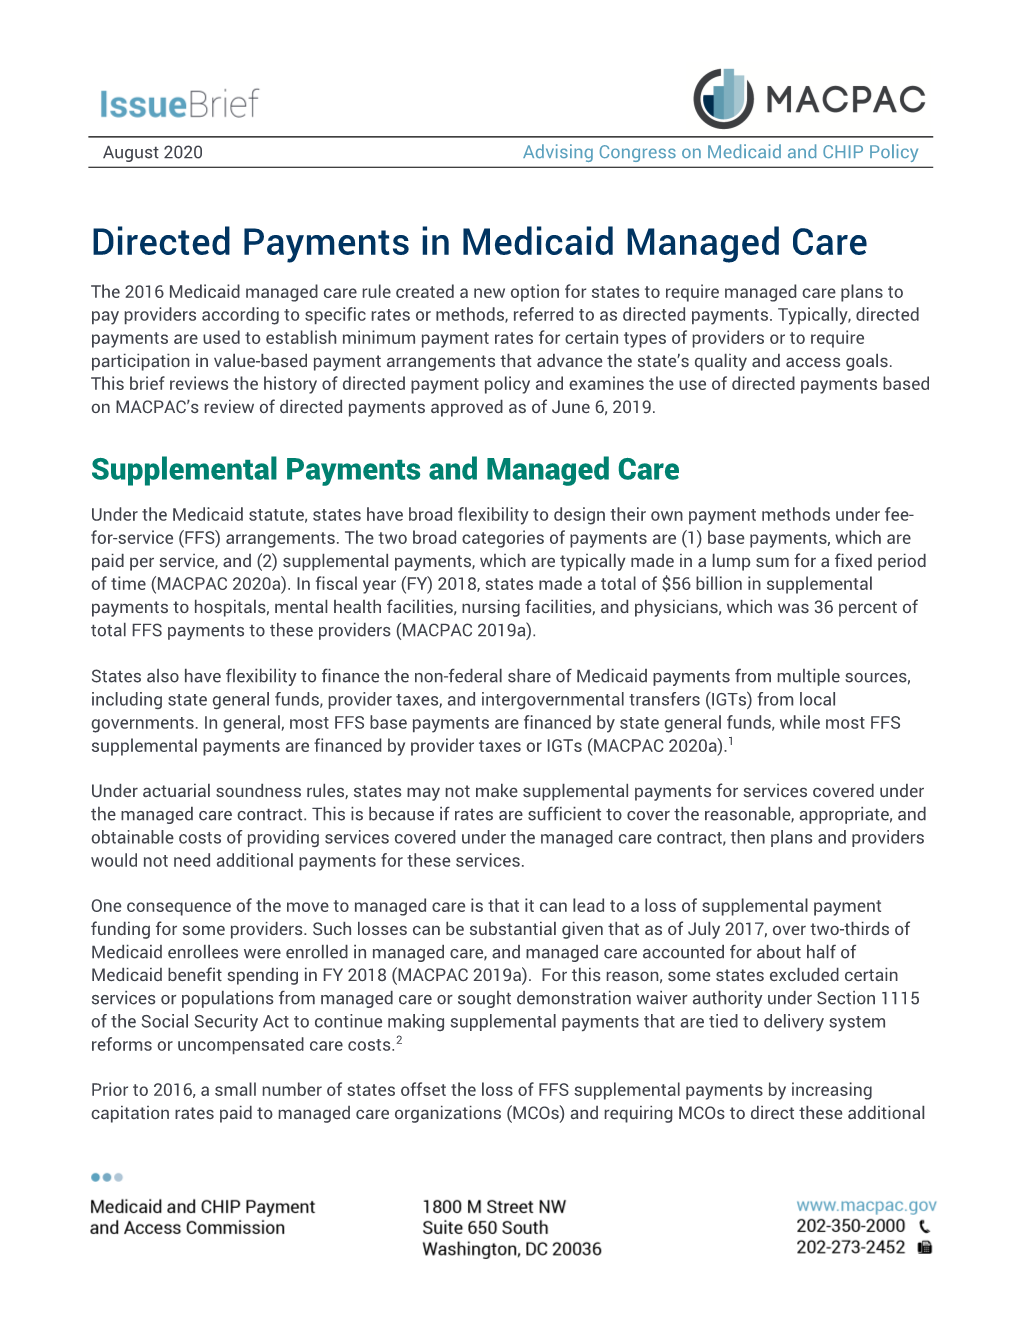 Directed Payments in Medicaid Managed Care